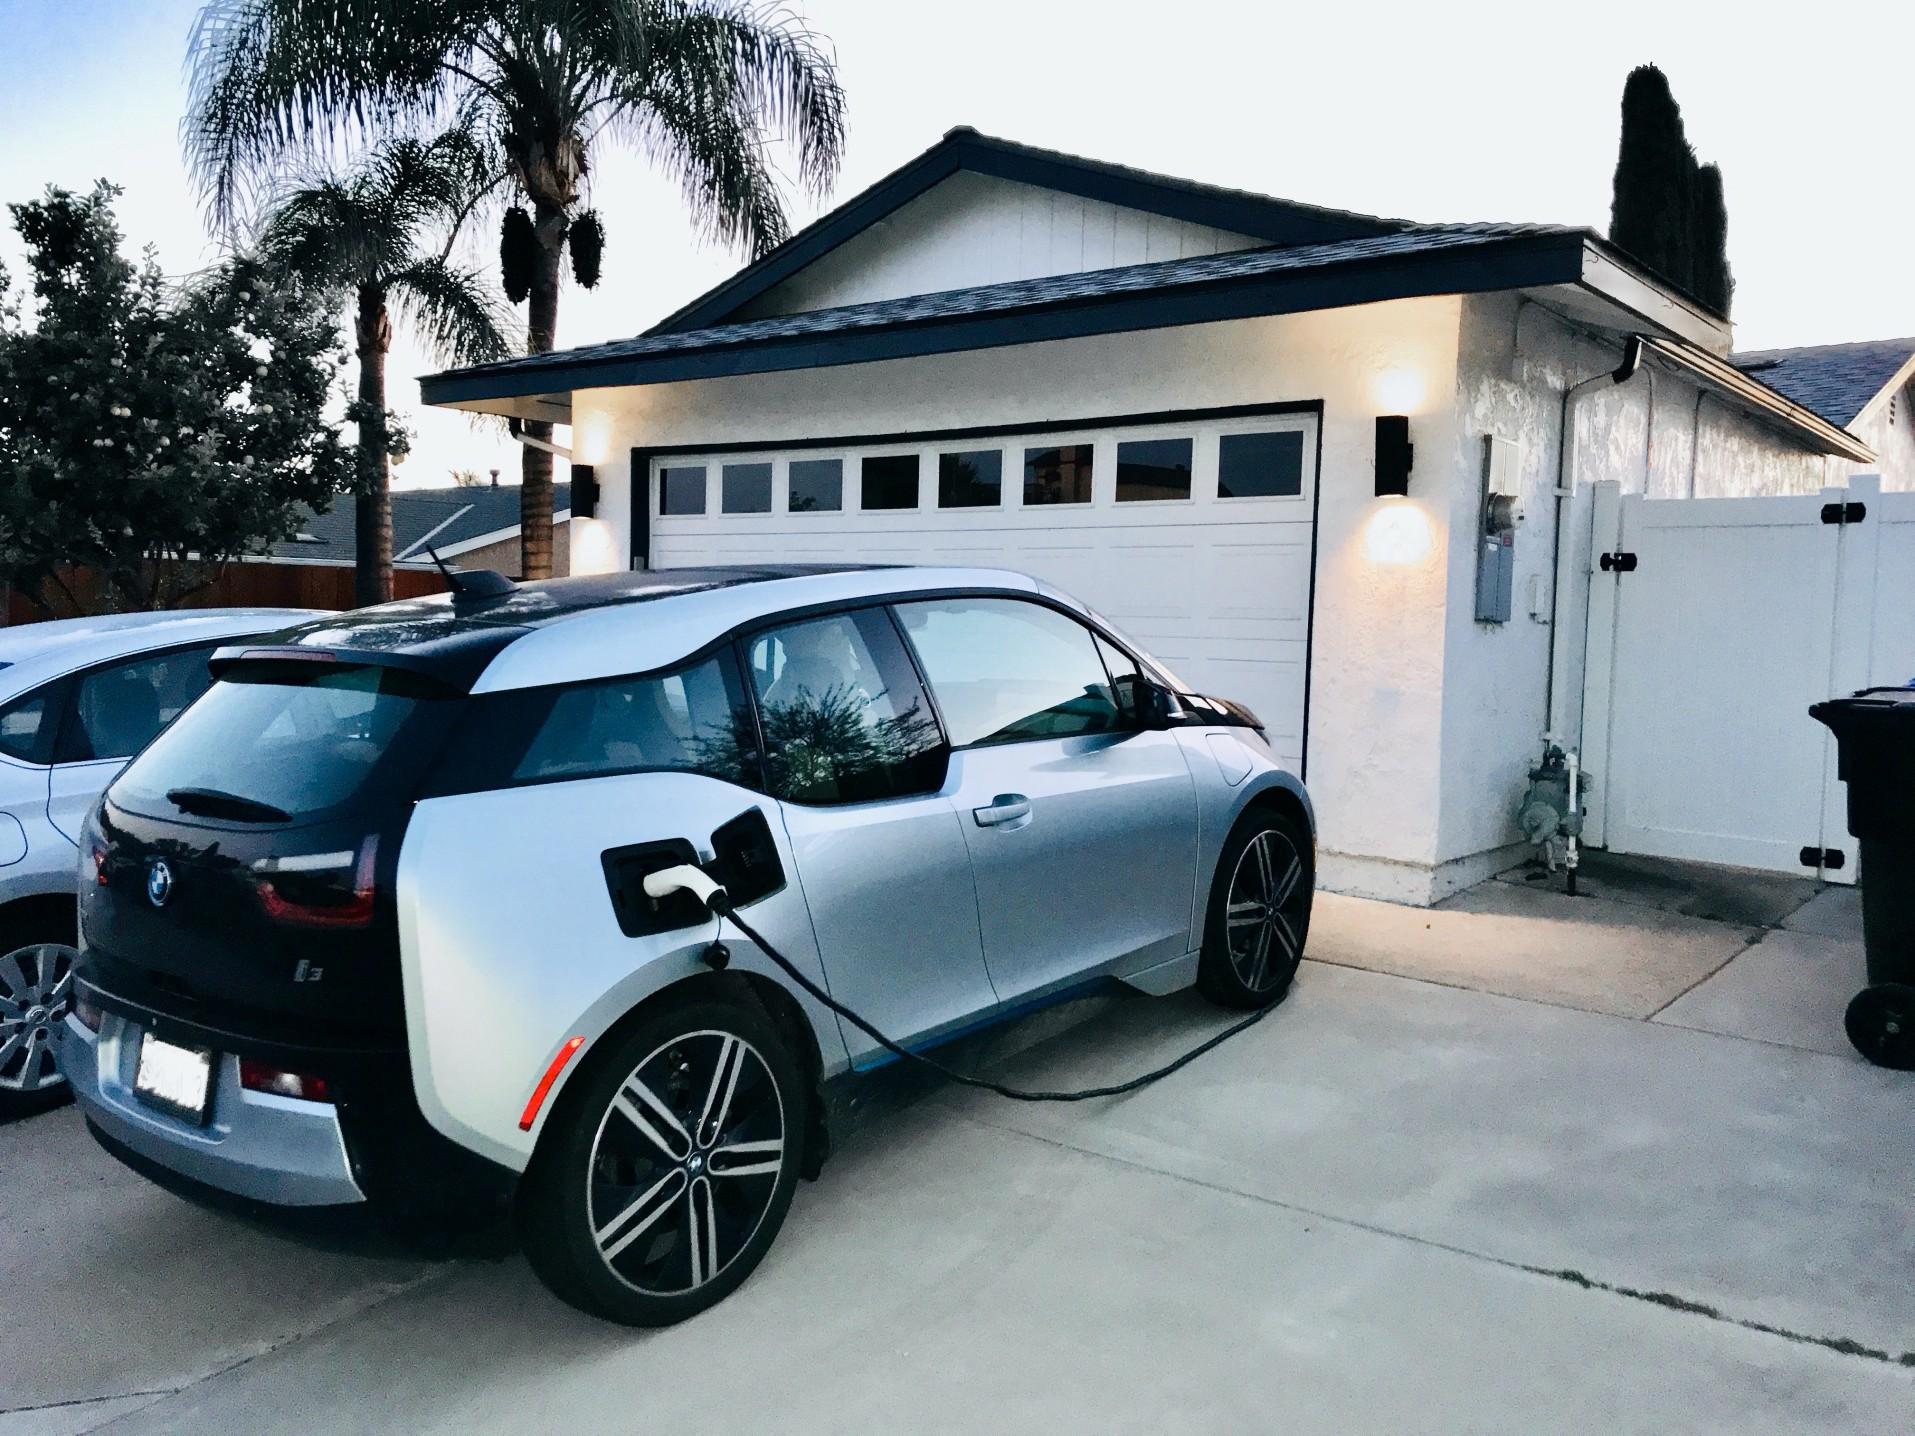 Affording a new electric vehicle could be easier than ever.